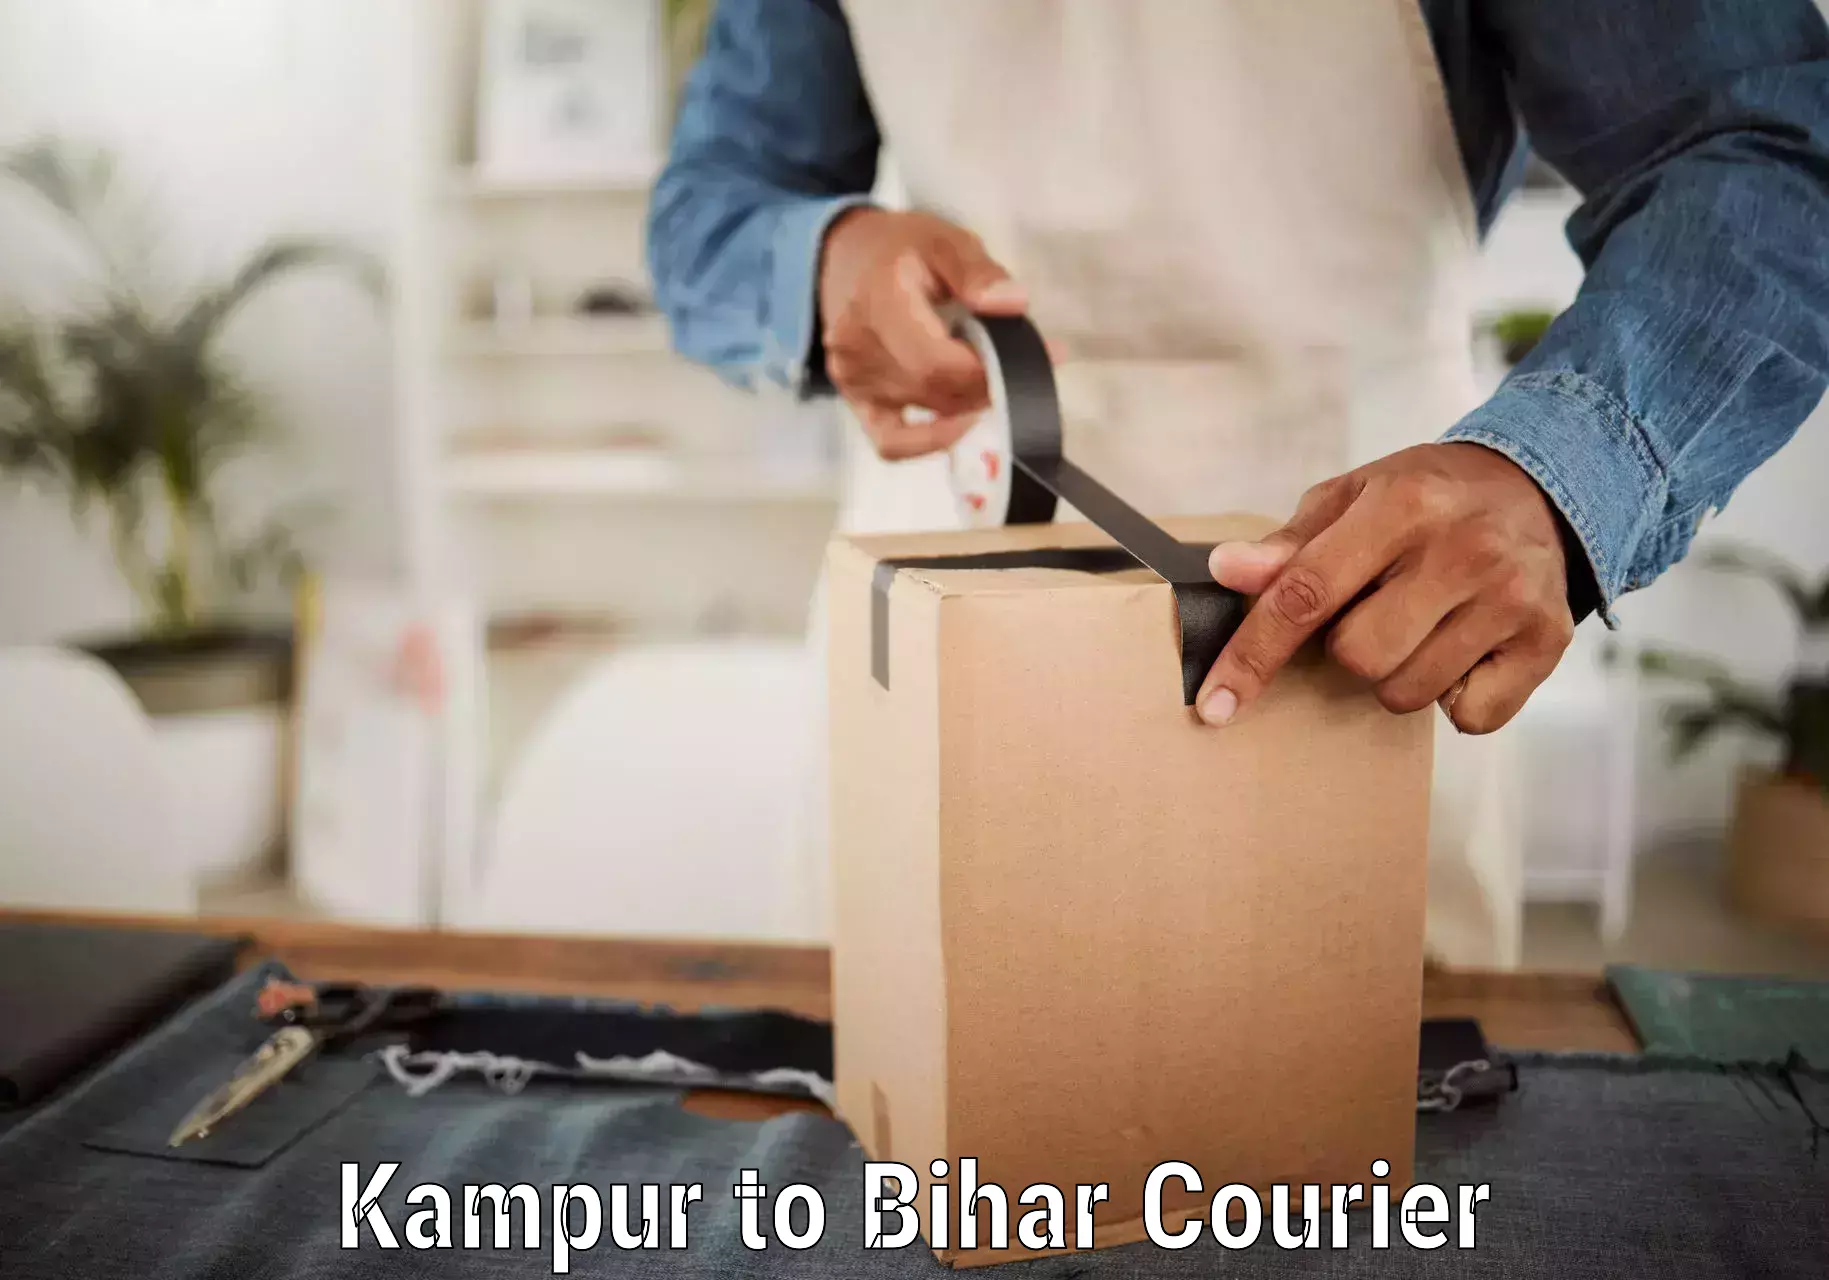 User-friendly delivery service Kampur to Bihar